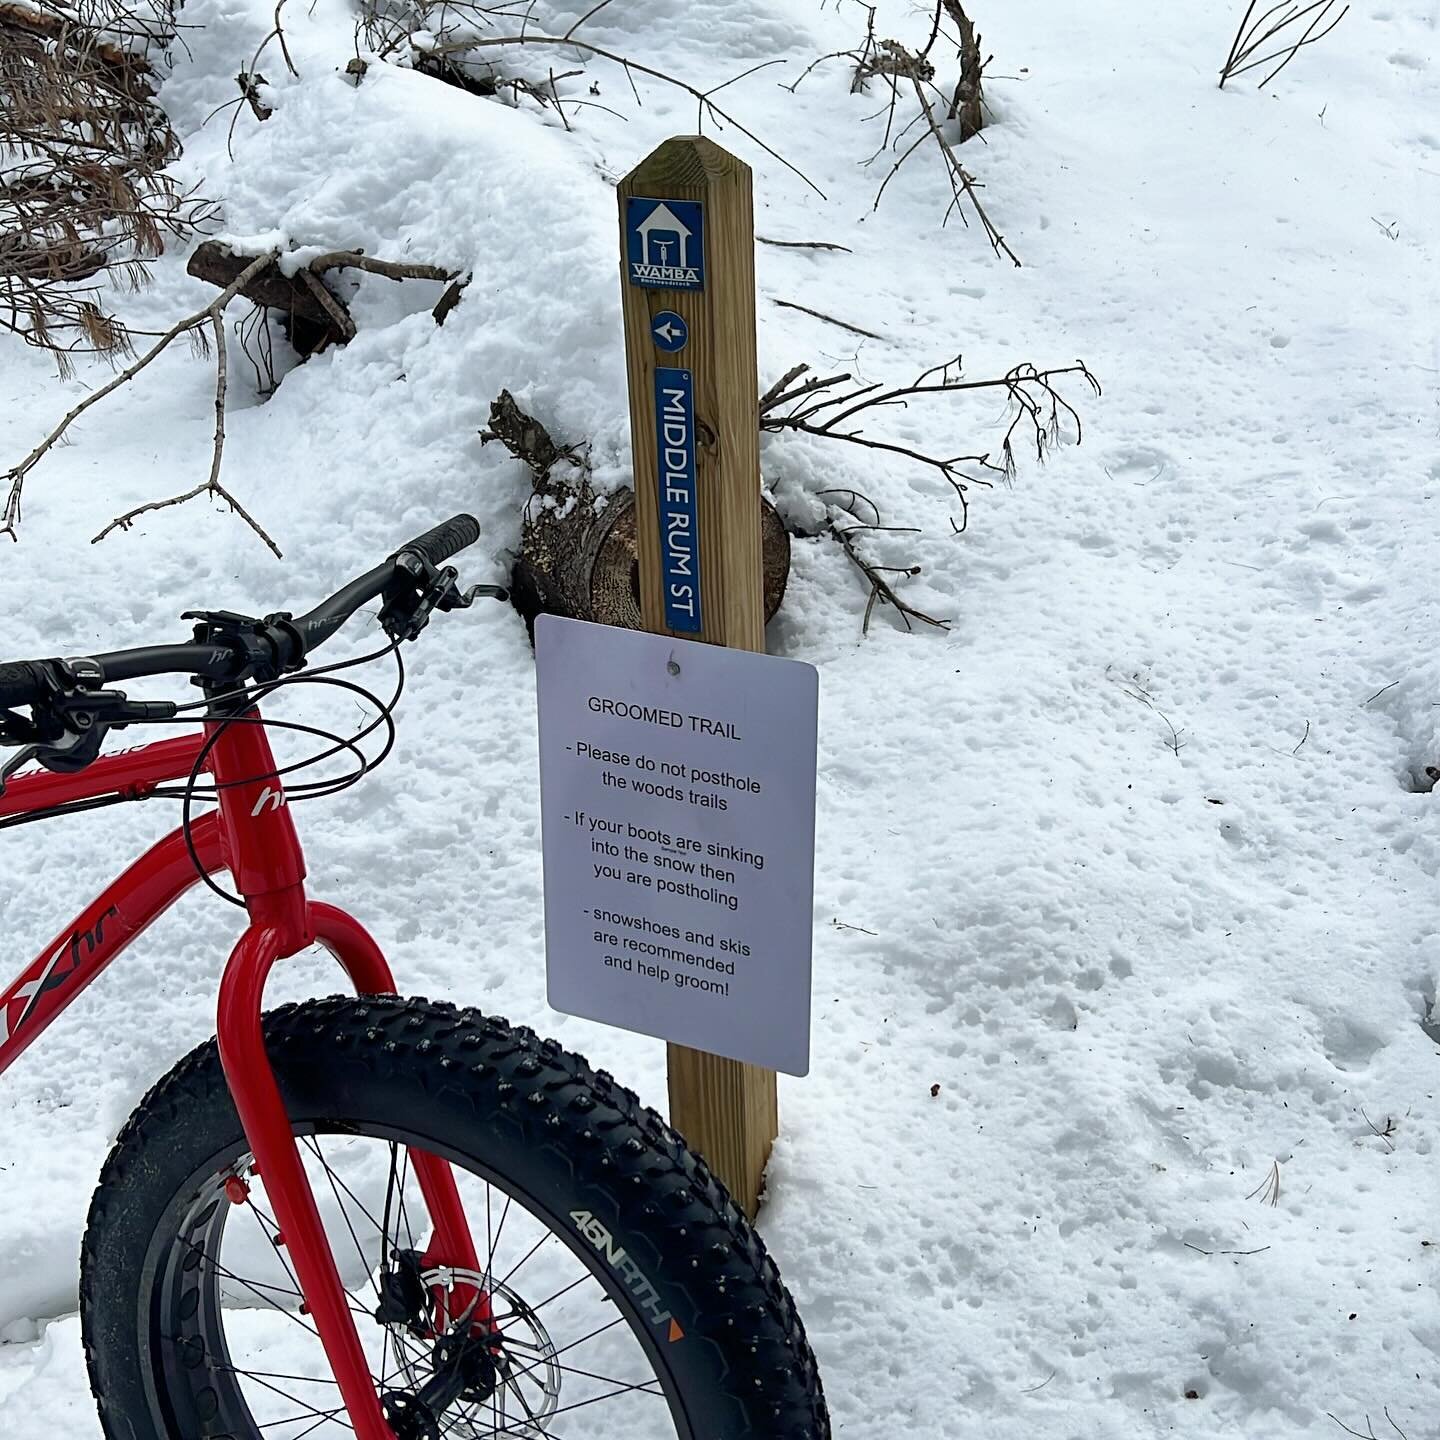 Stuff is wicked good at the Aqueduct. Get on it. #fatbike #vtlife